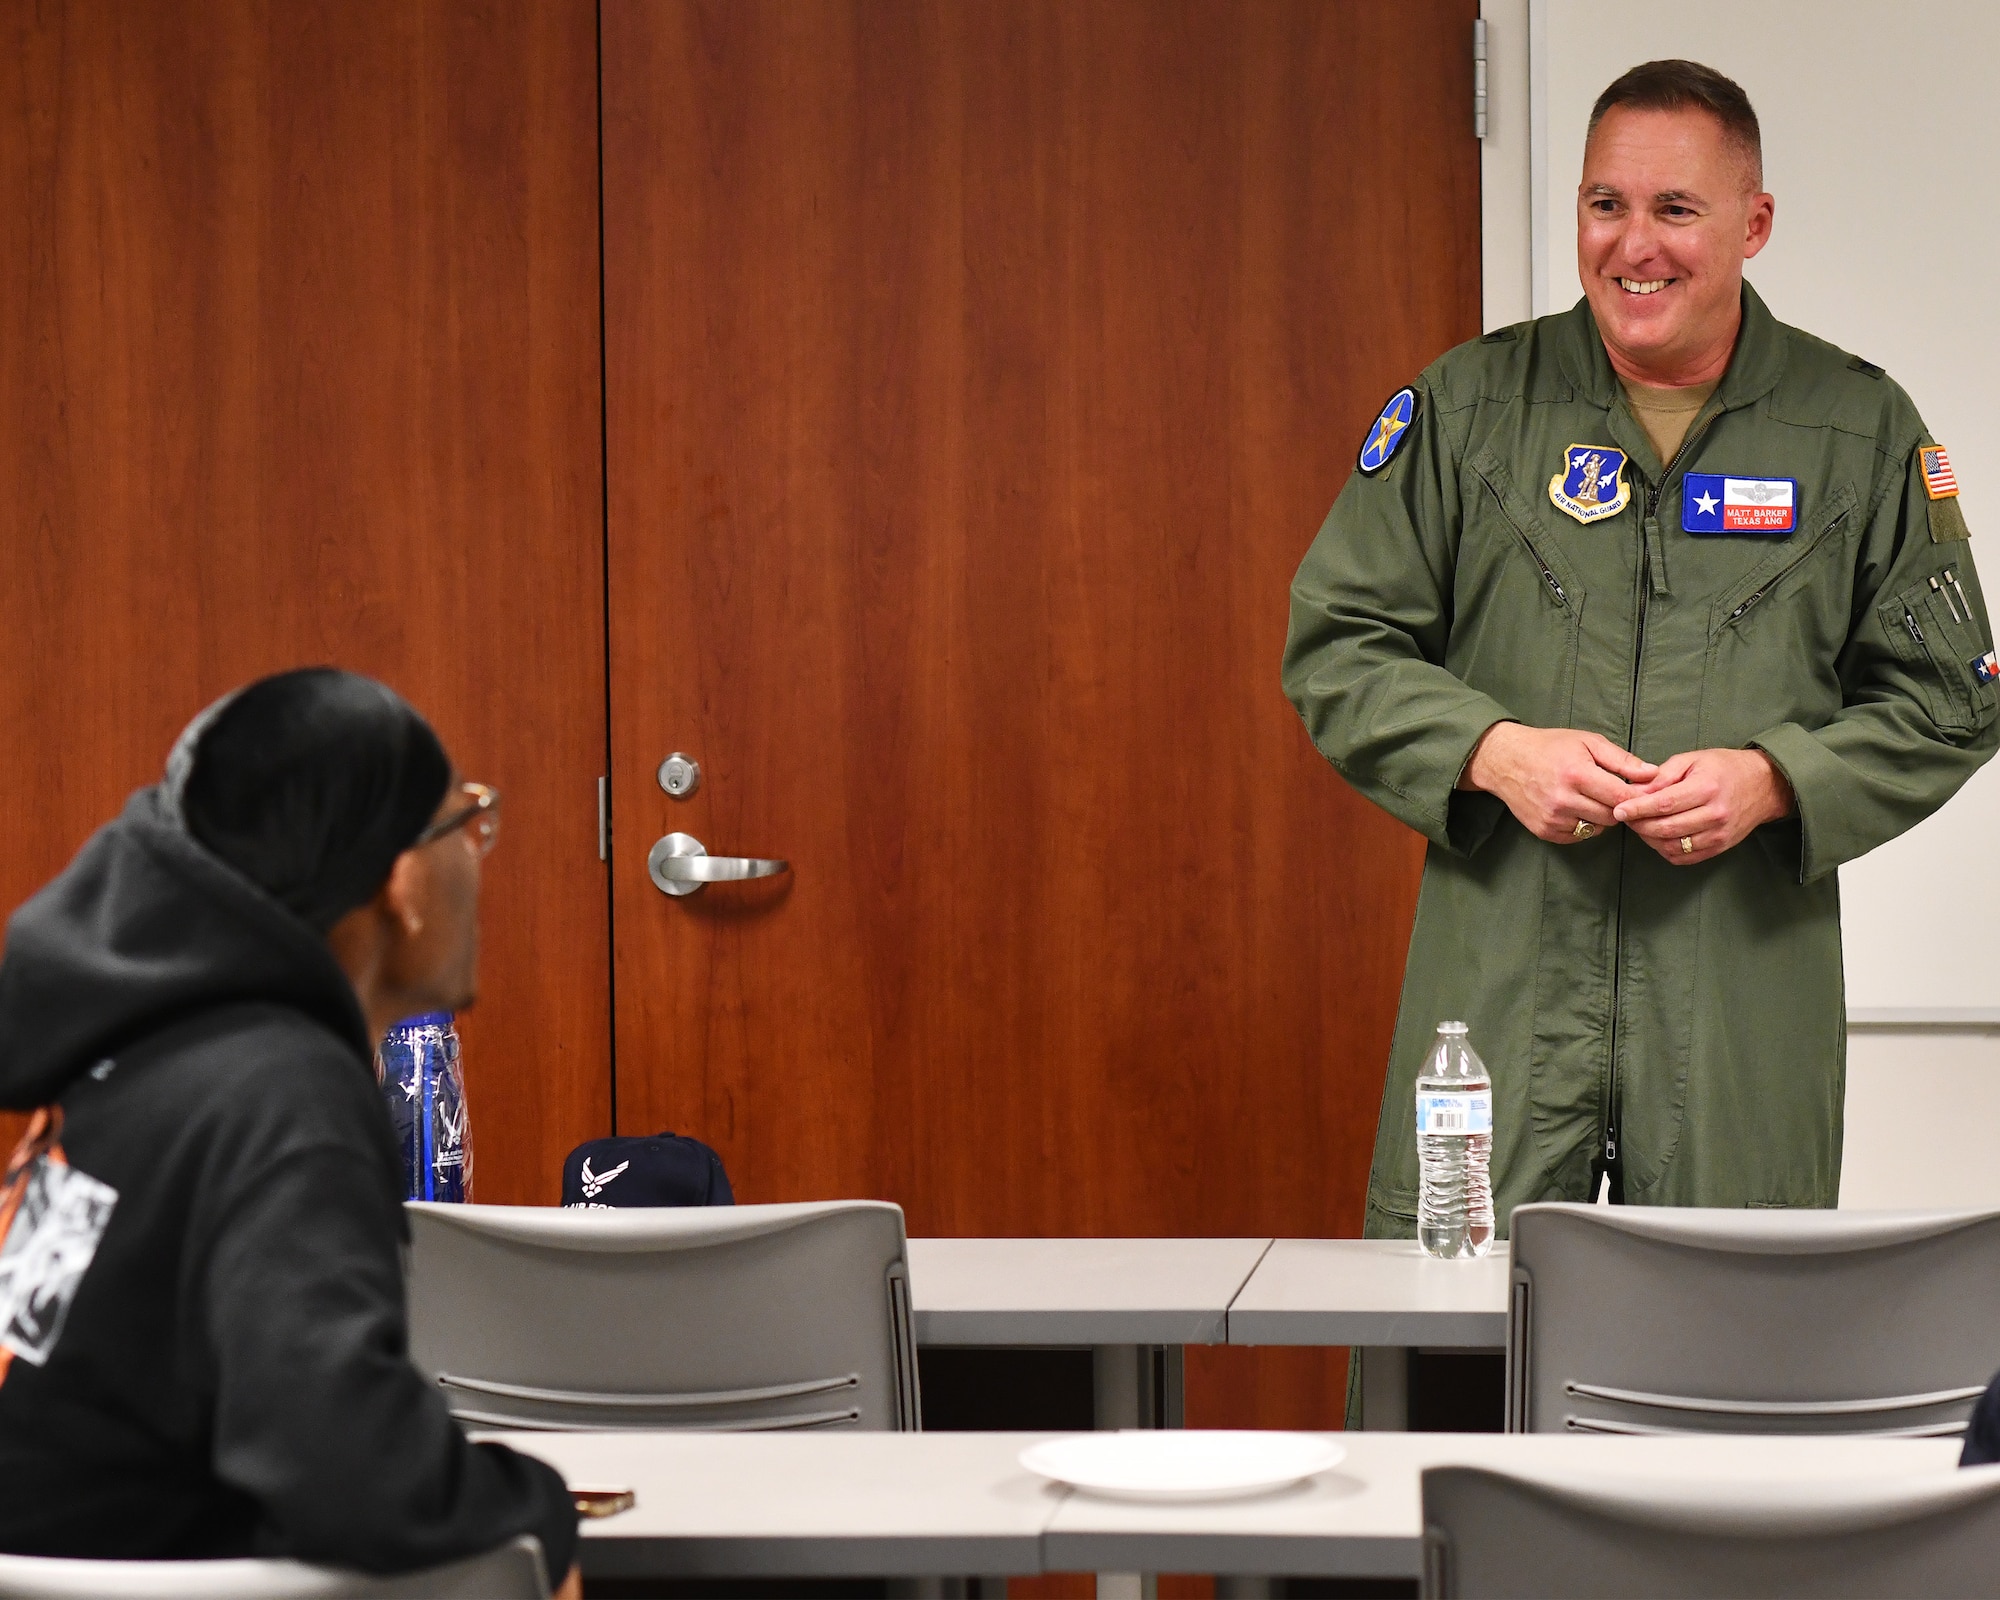 Brig. Gen. Matthew Barker (right), Texas Air National Guard chief of staff, speaks with students at the University of Houston about opportunities within the Air Force, Air Force Reserve and Air National Guard, Feb. 23, 2022, in Houston.